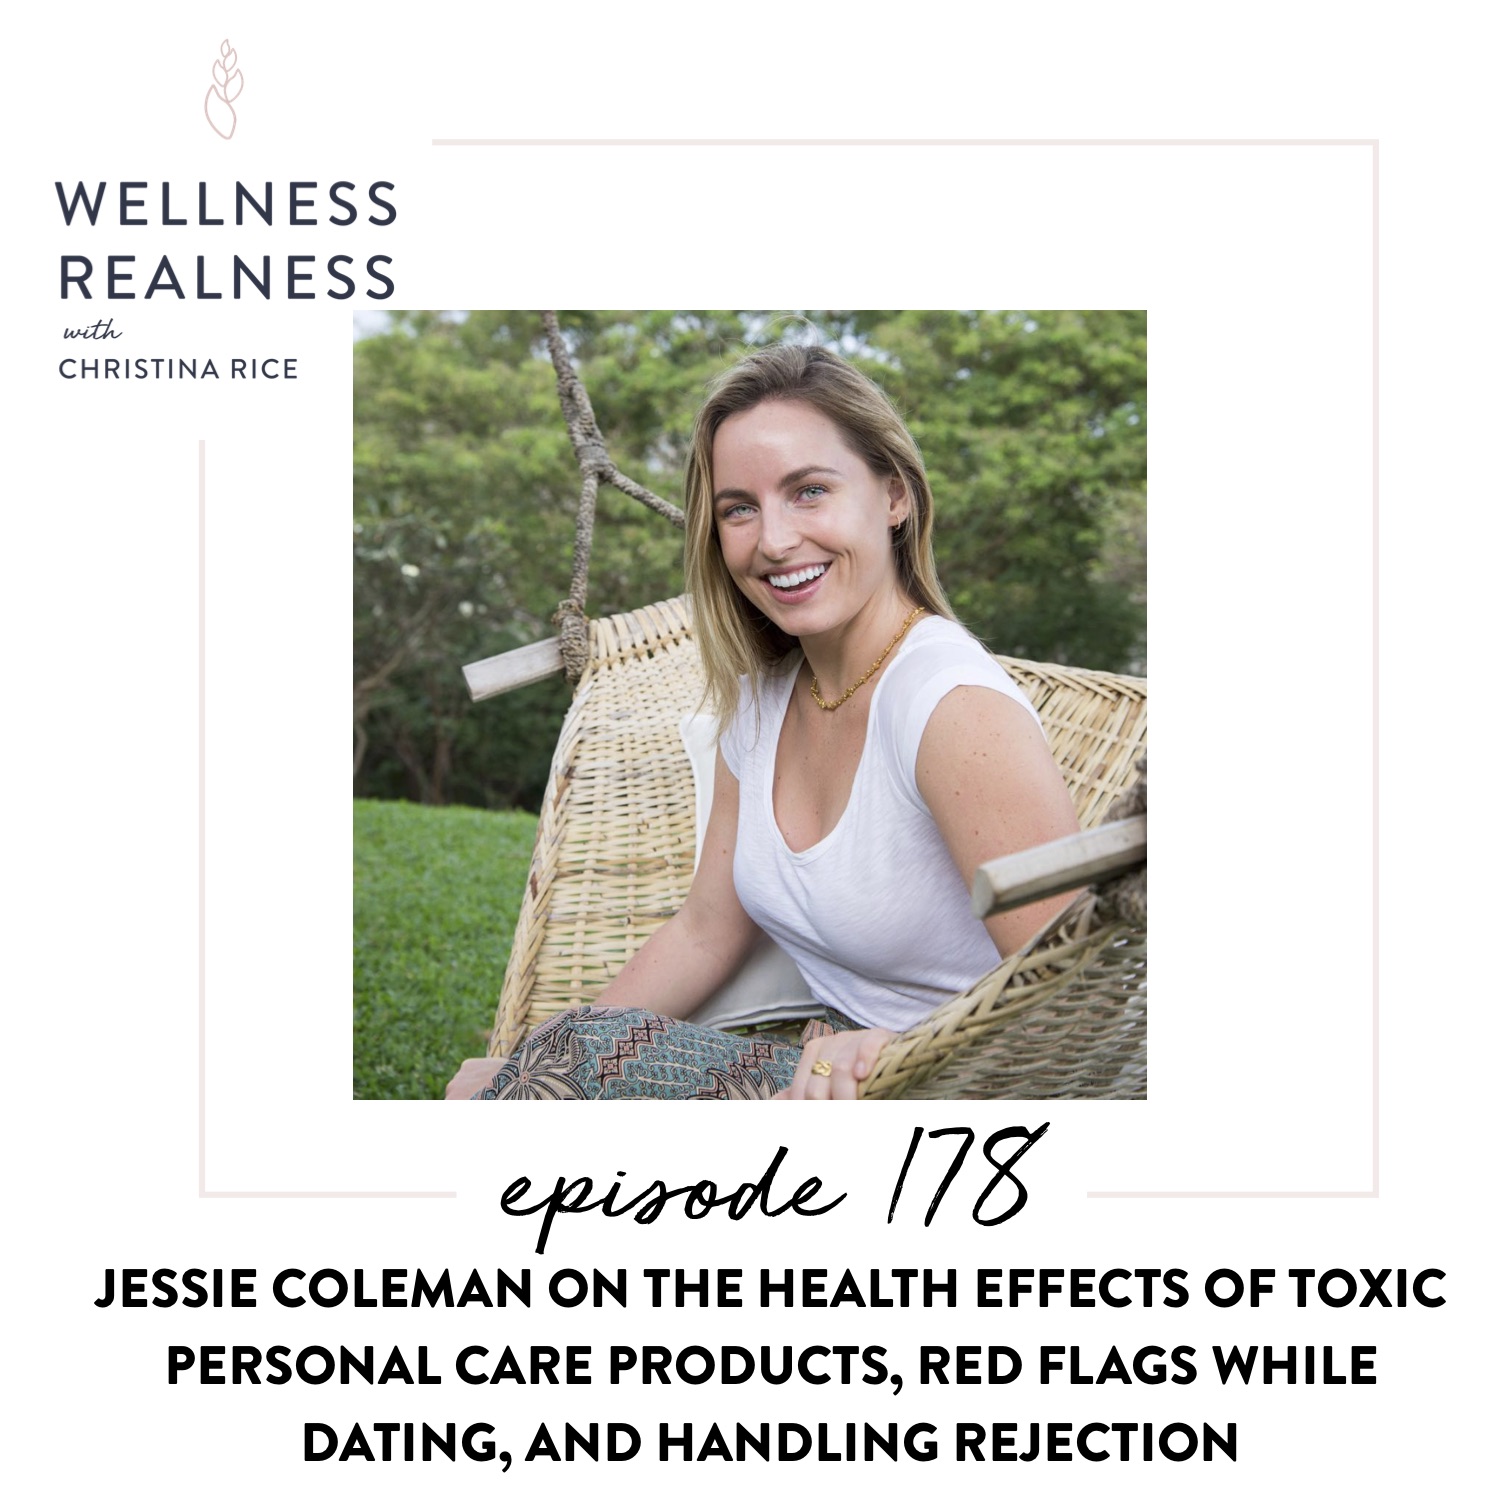 178: Jessie Coleman on the Health Effects of Toxic Personal Care Products, Red Flags While Dating, and Handling Rejection